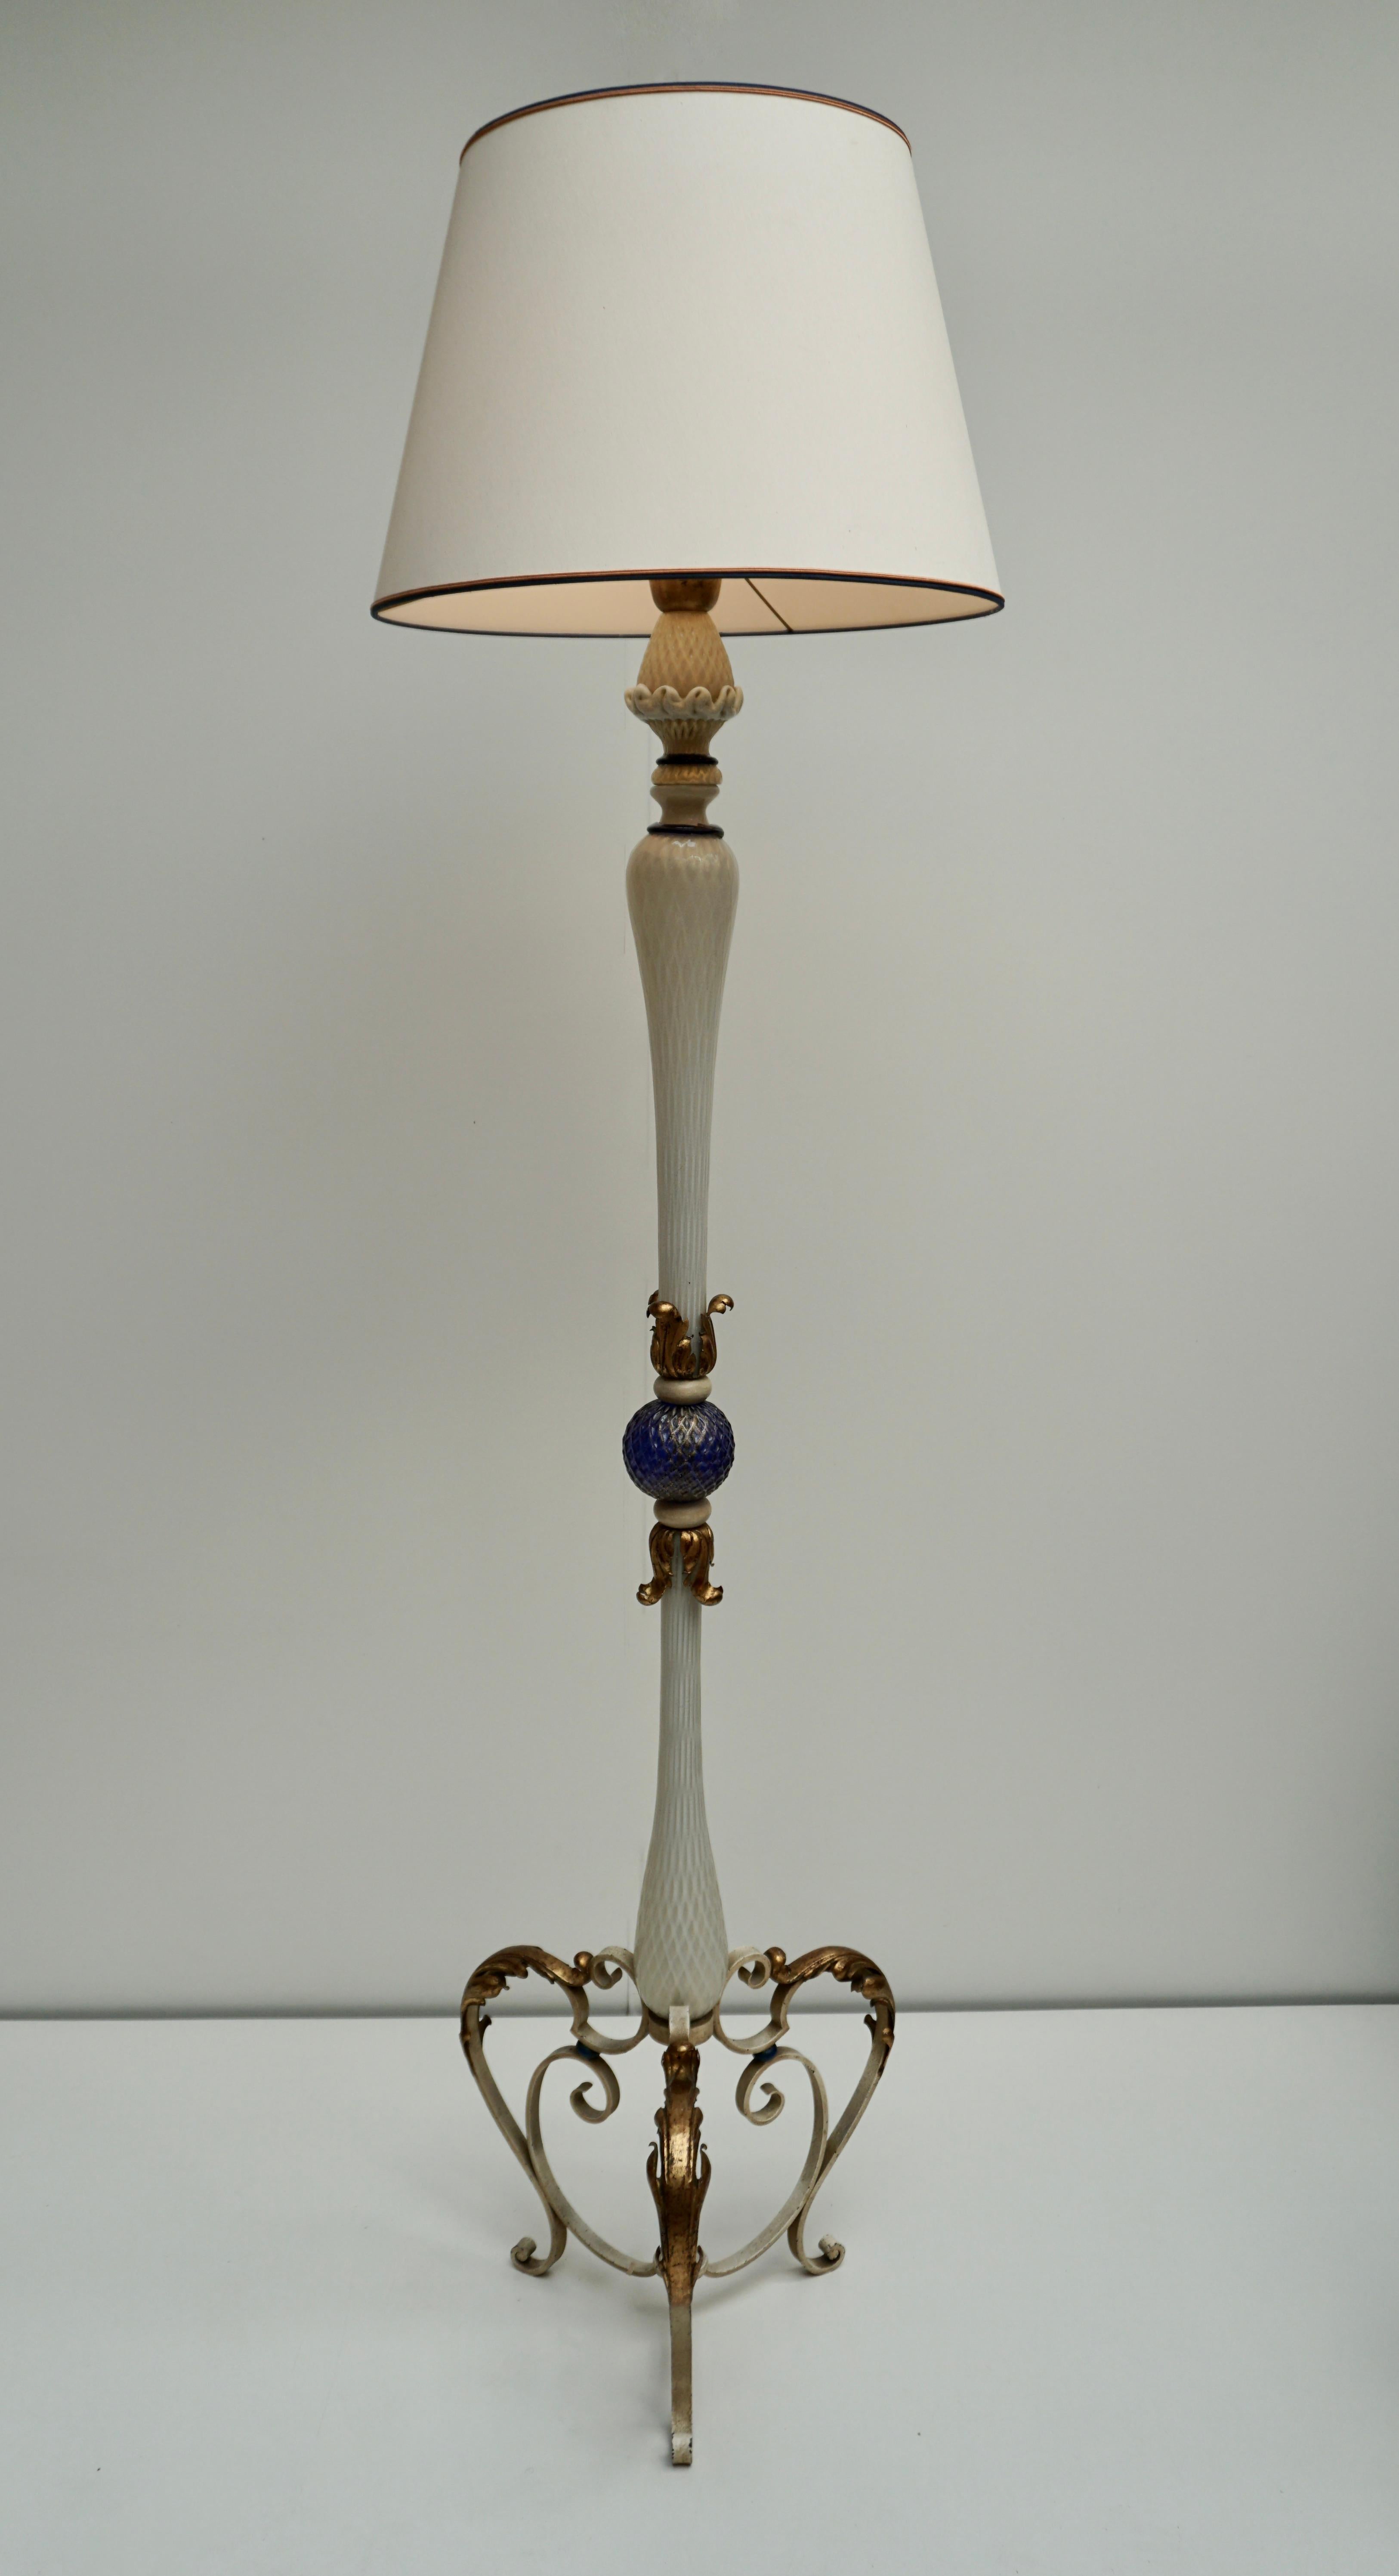 Elegant Italian Murano glass floor lamp with gold inclusion glass in white blue with a white metal base decorated with gilded ornaments.
Italy, 1940s-1950s.
Base diameter 44 cm - height base including fitting is 163 cm.
Diamater shade 50 cm -